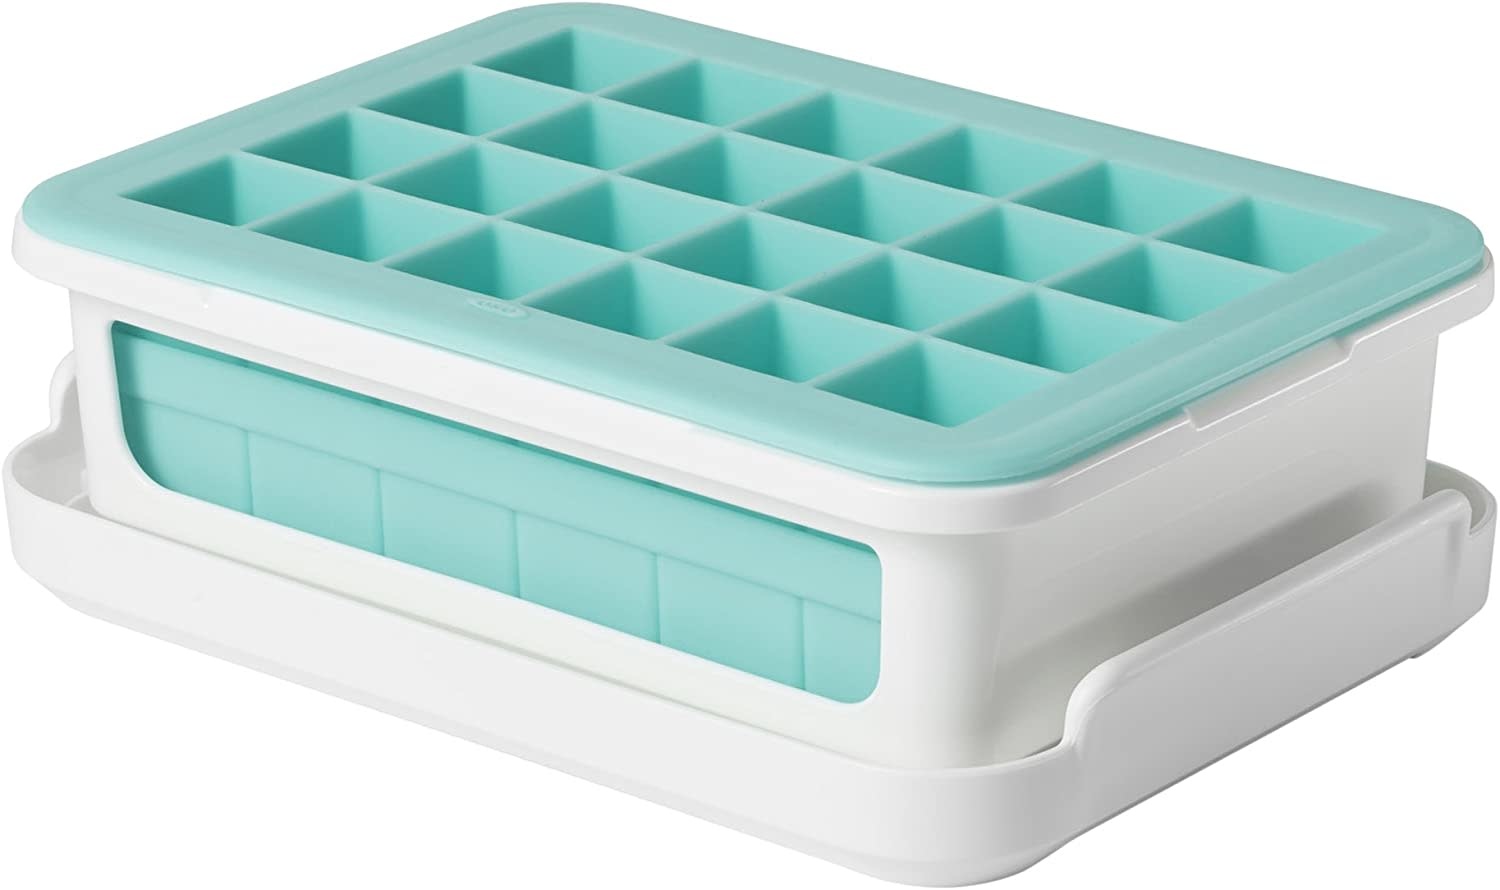 Covered Silicone Ice Cube Tray-Large Cubes